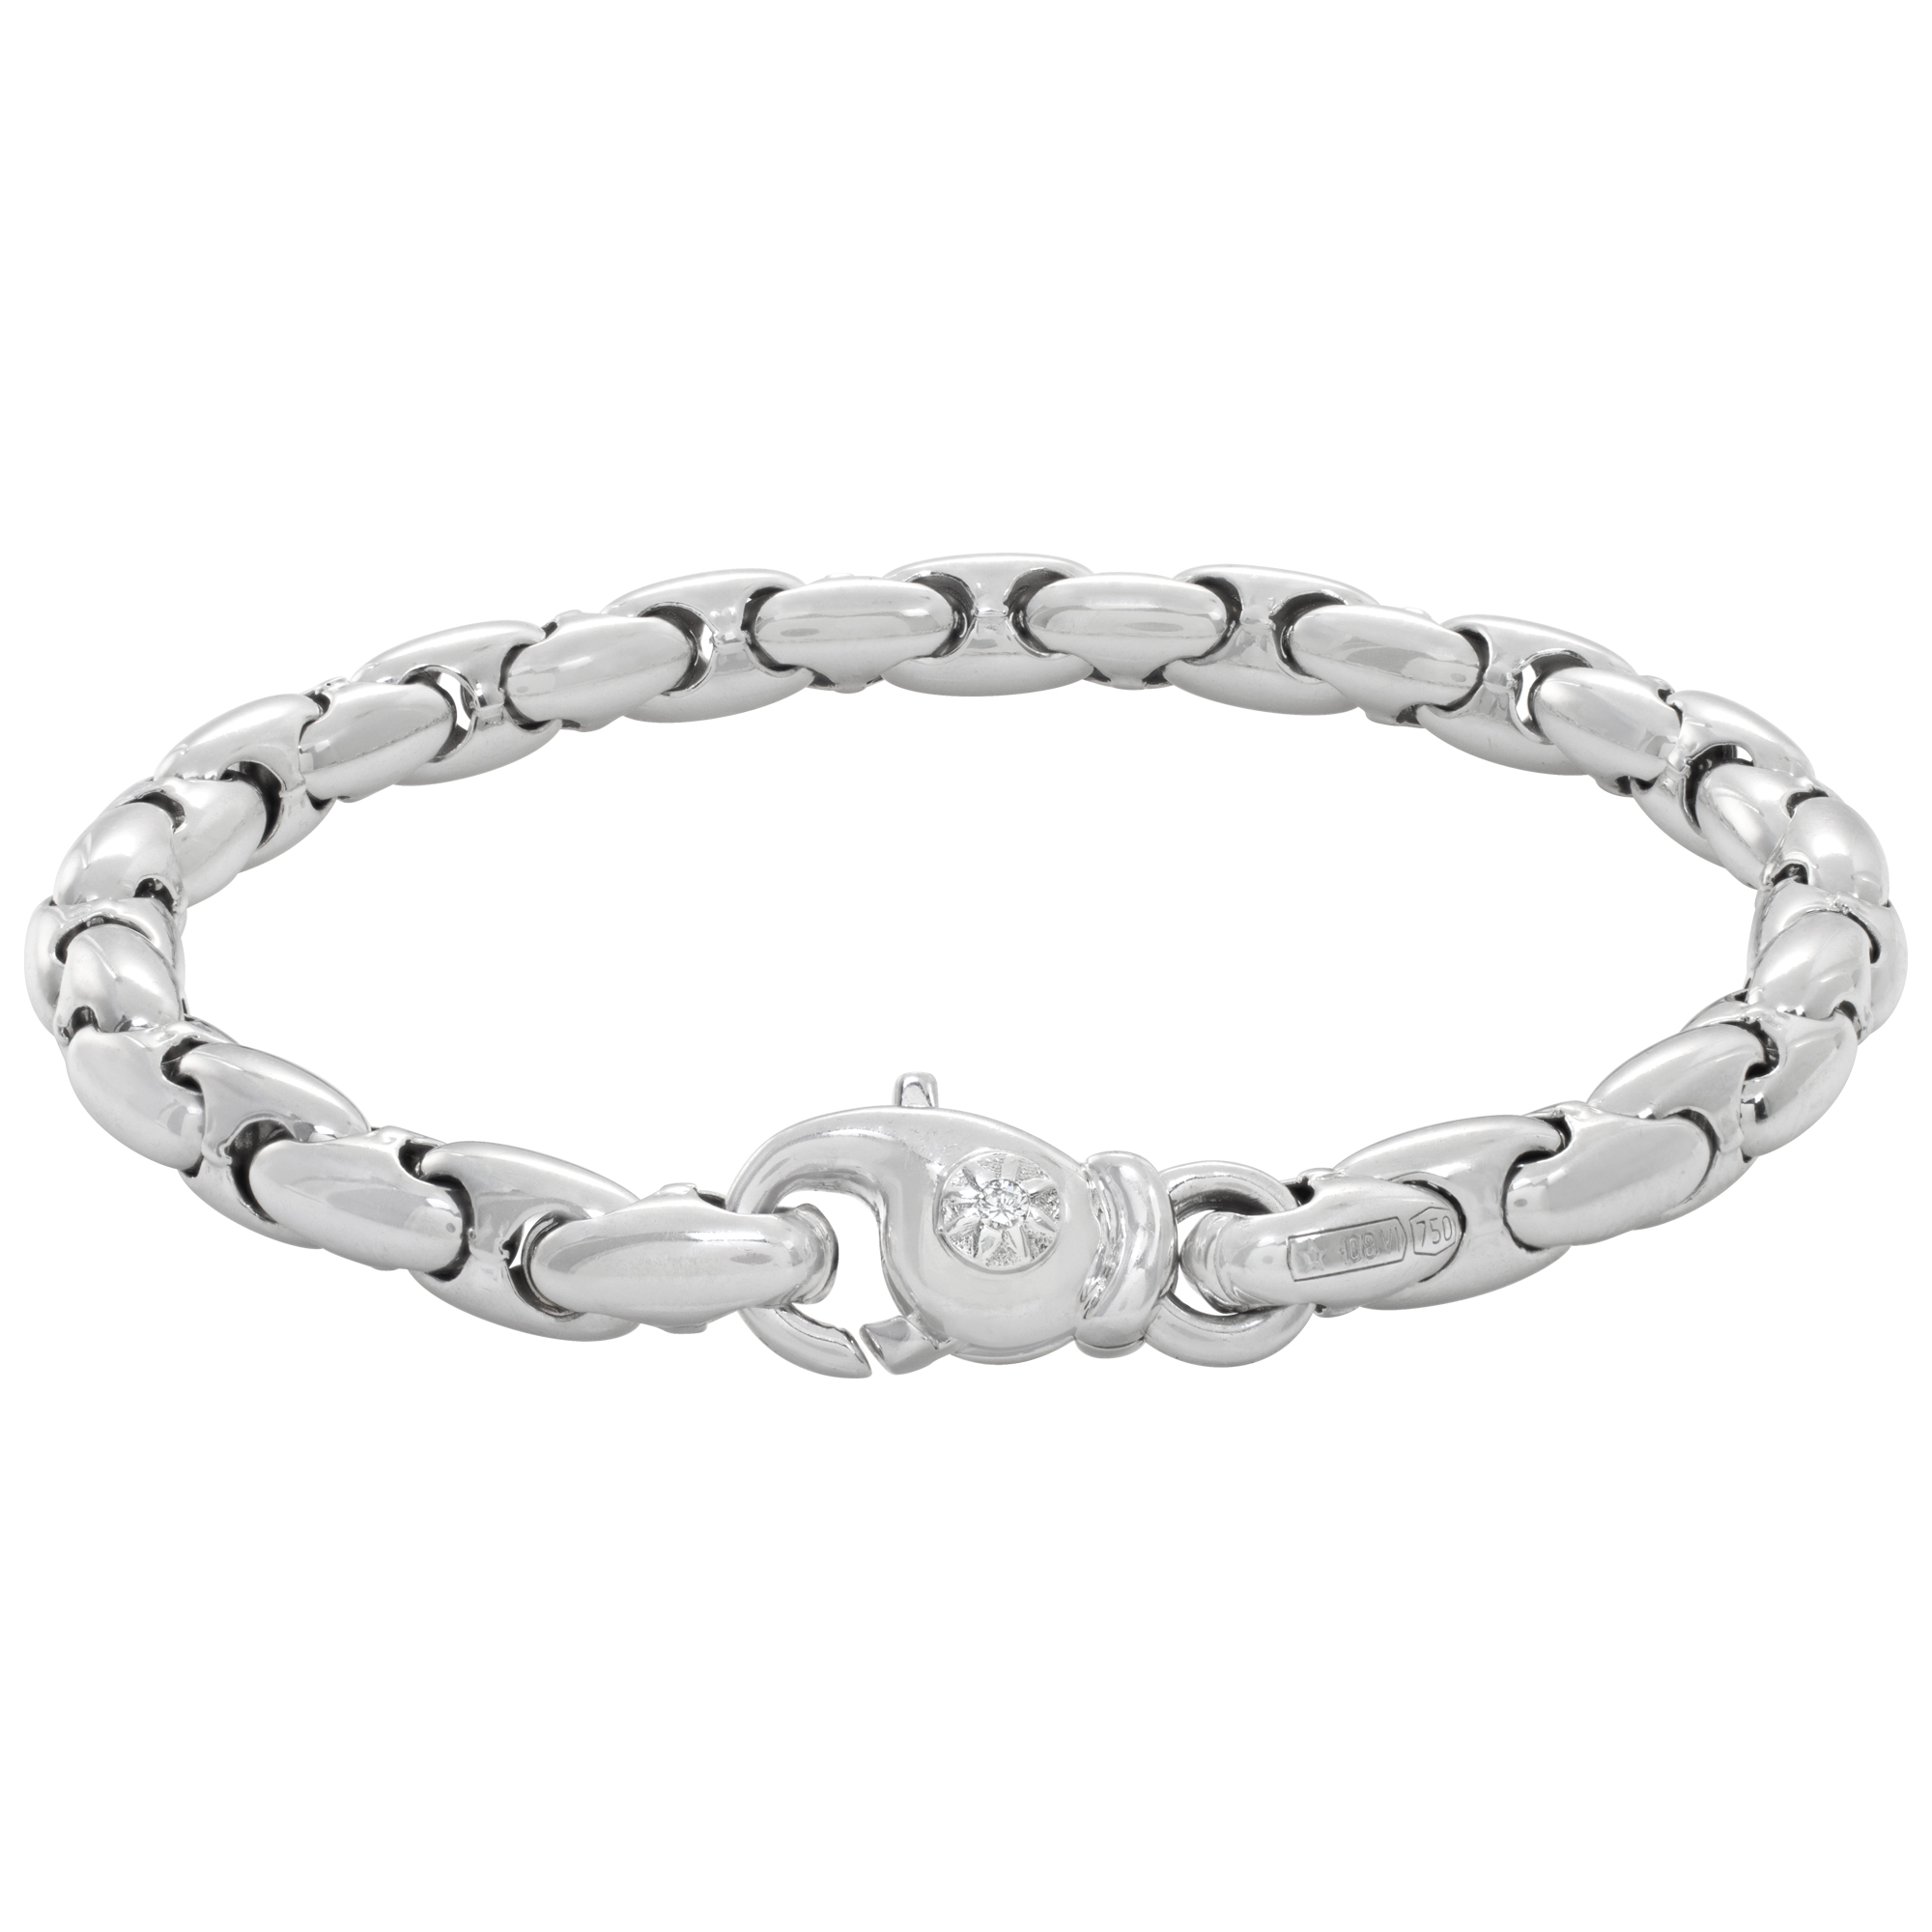 Chimento 18k White Gold Bracelet With A Diamond On The Clasp